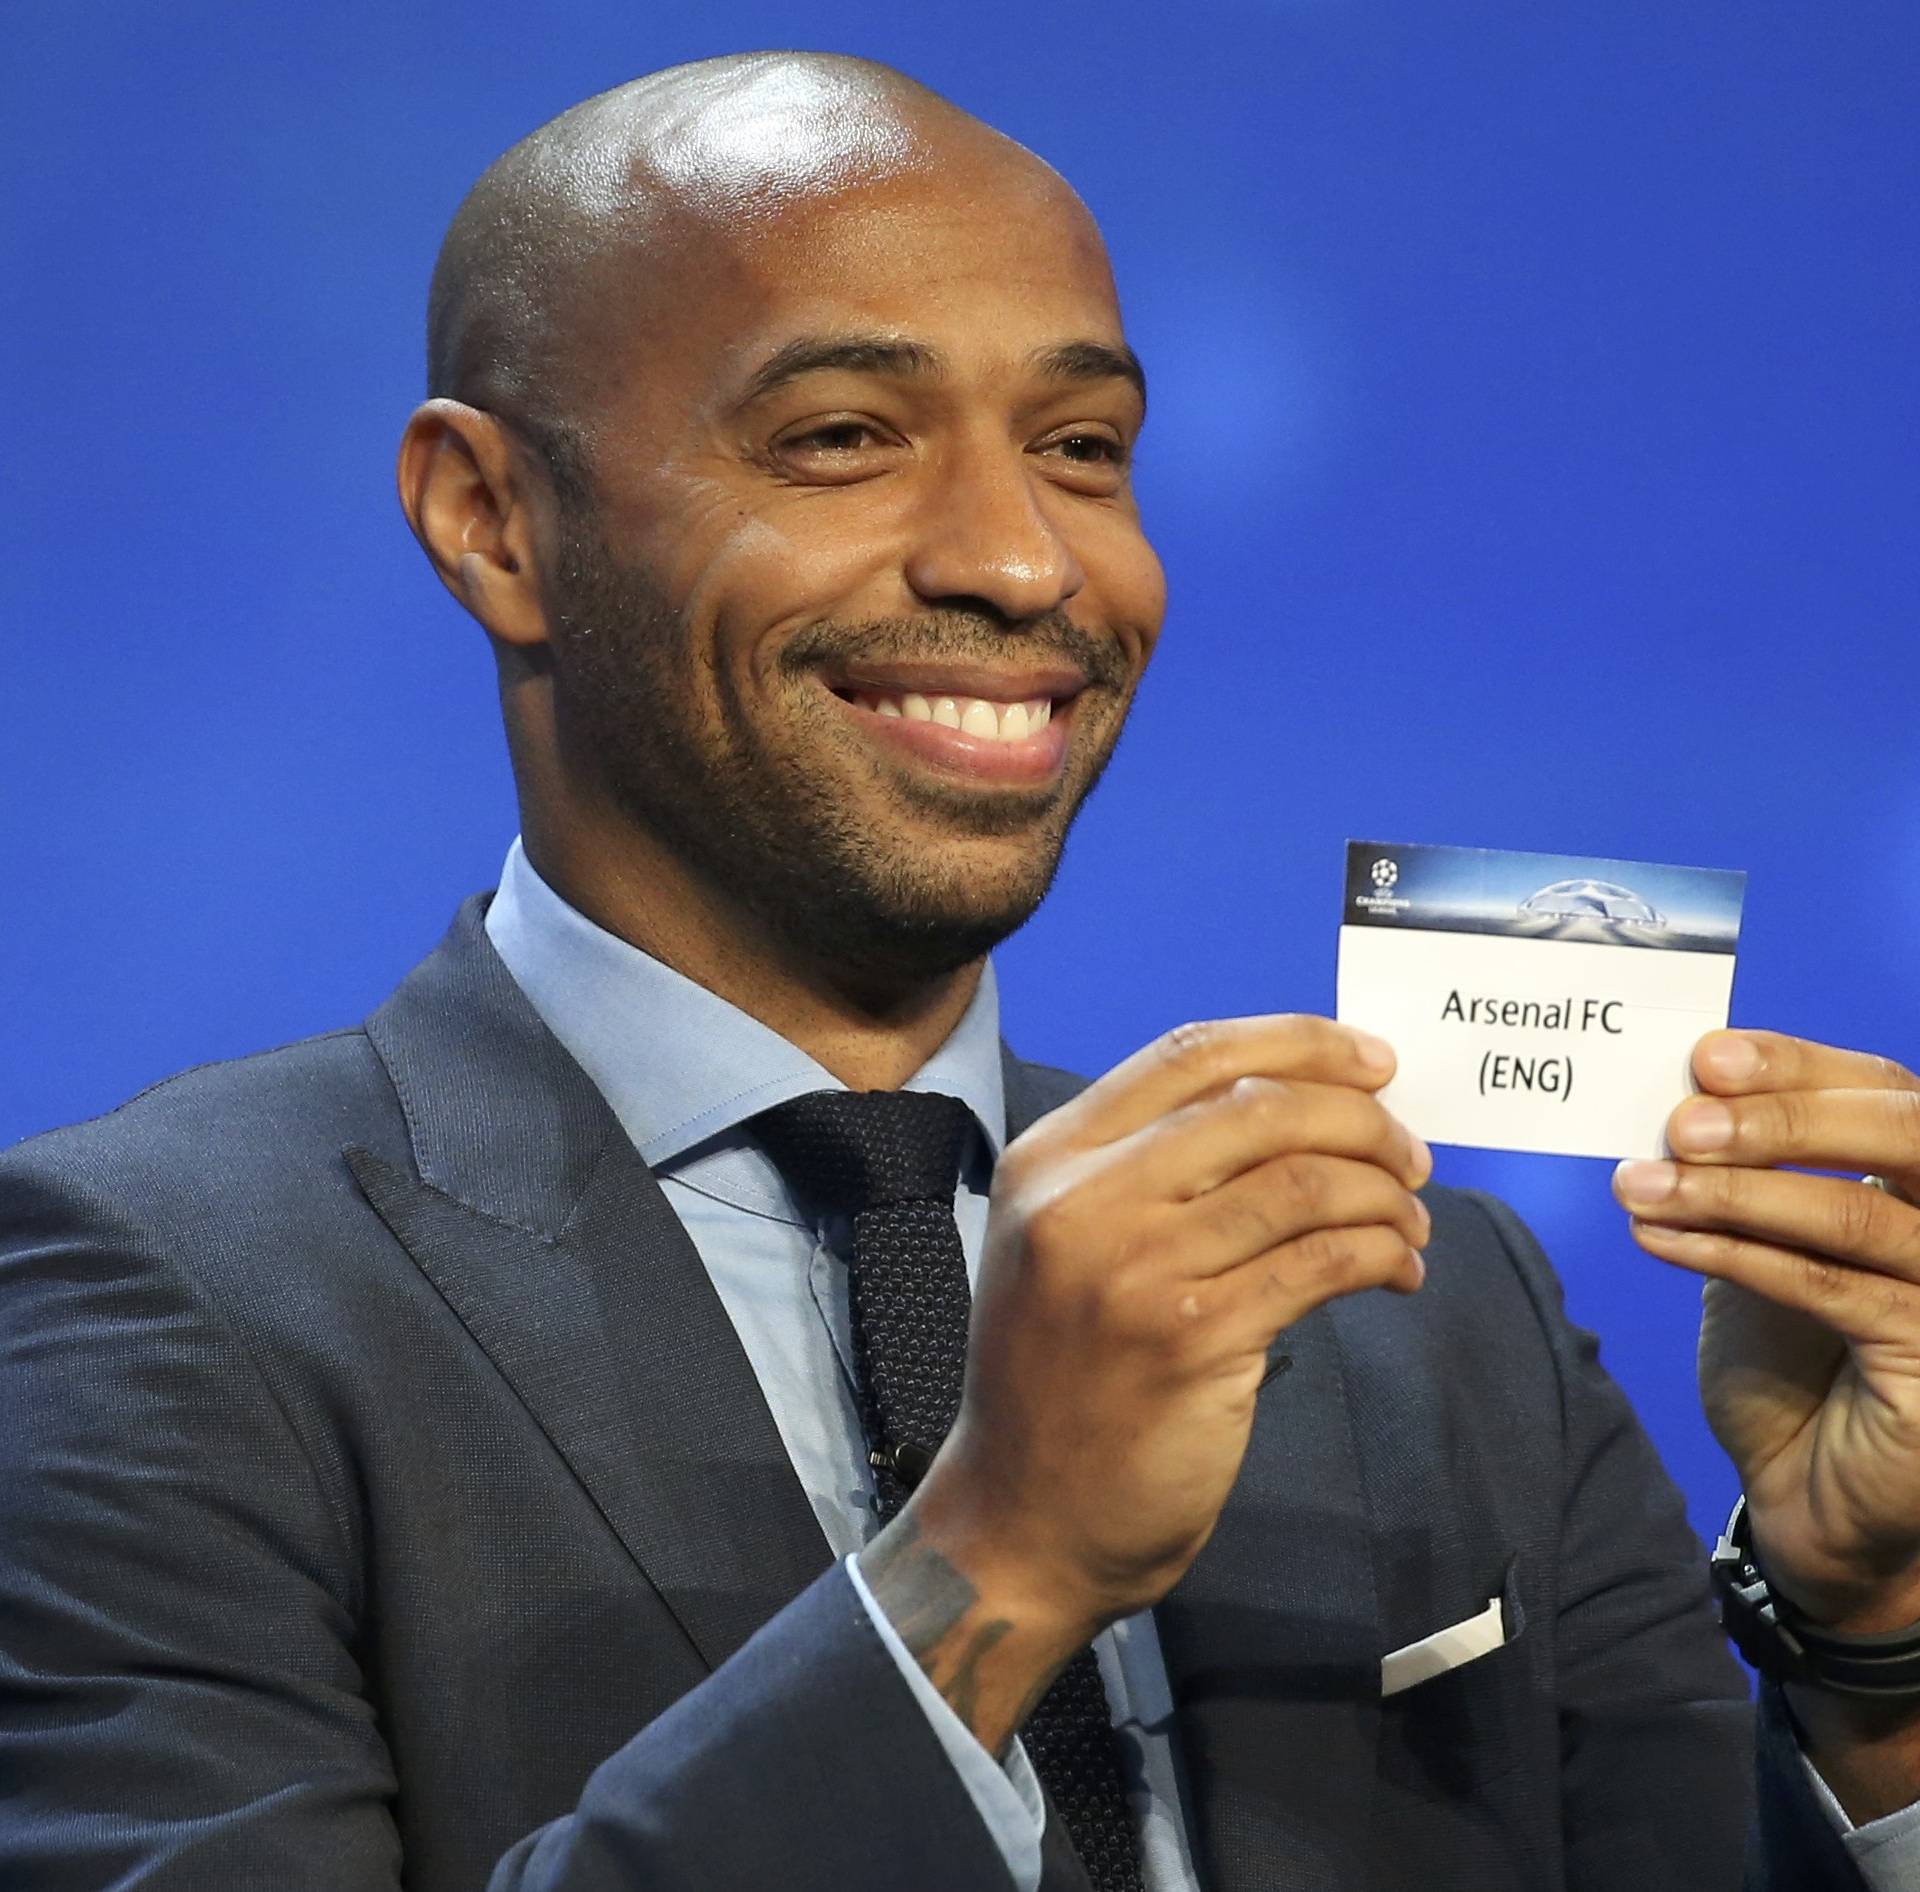 Former soccer player Thierry Henry holds a paper with the name of Arsenal FC during the draw ceremony for the 2016/2017 Champions League Cup soccer competition at Monaco's Grimaldi Forum in Monaco